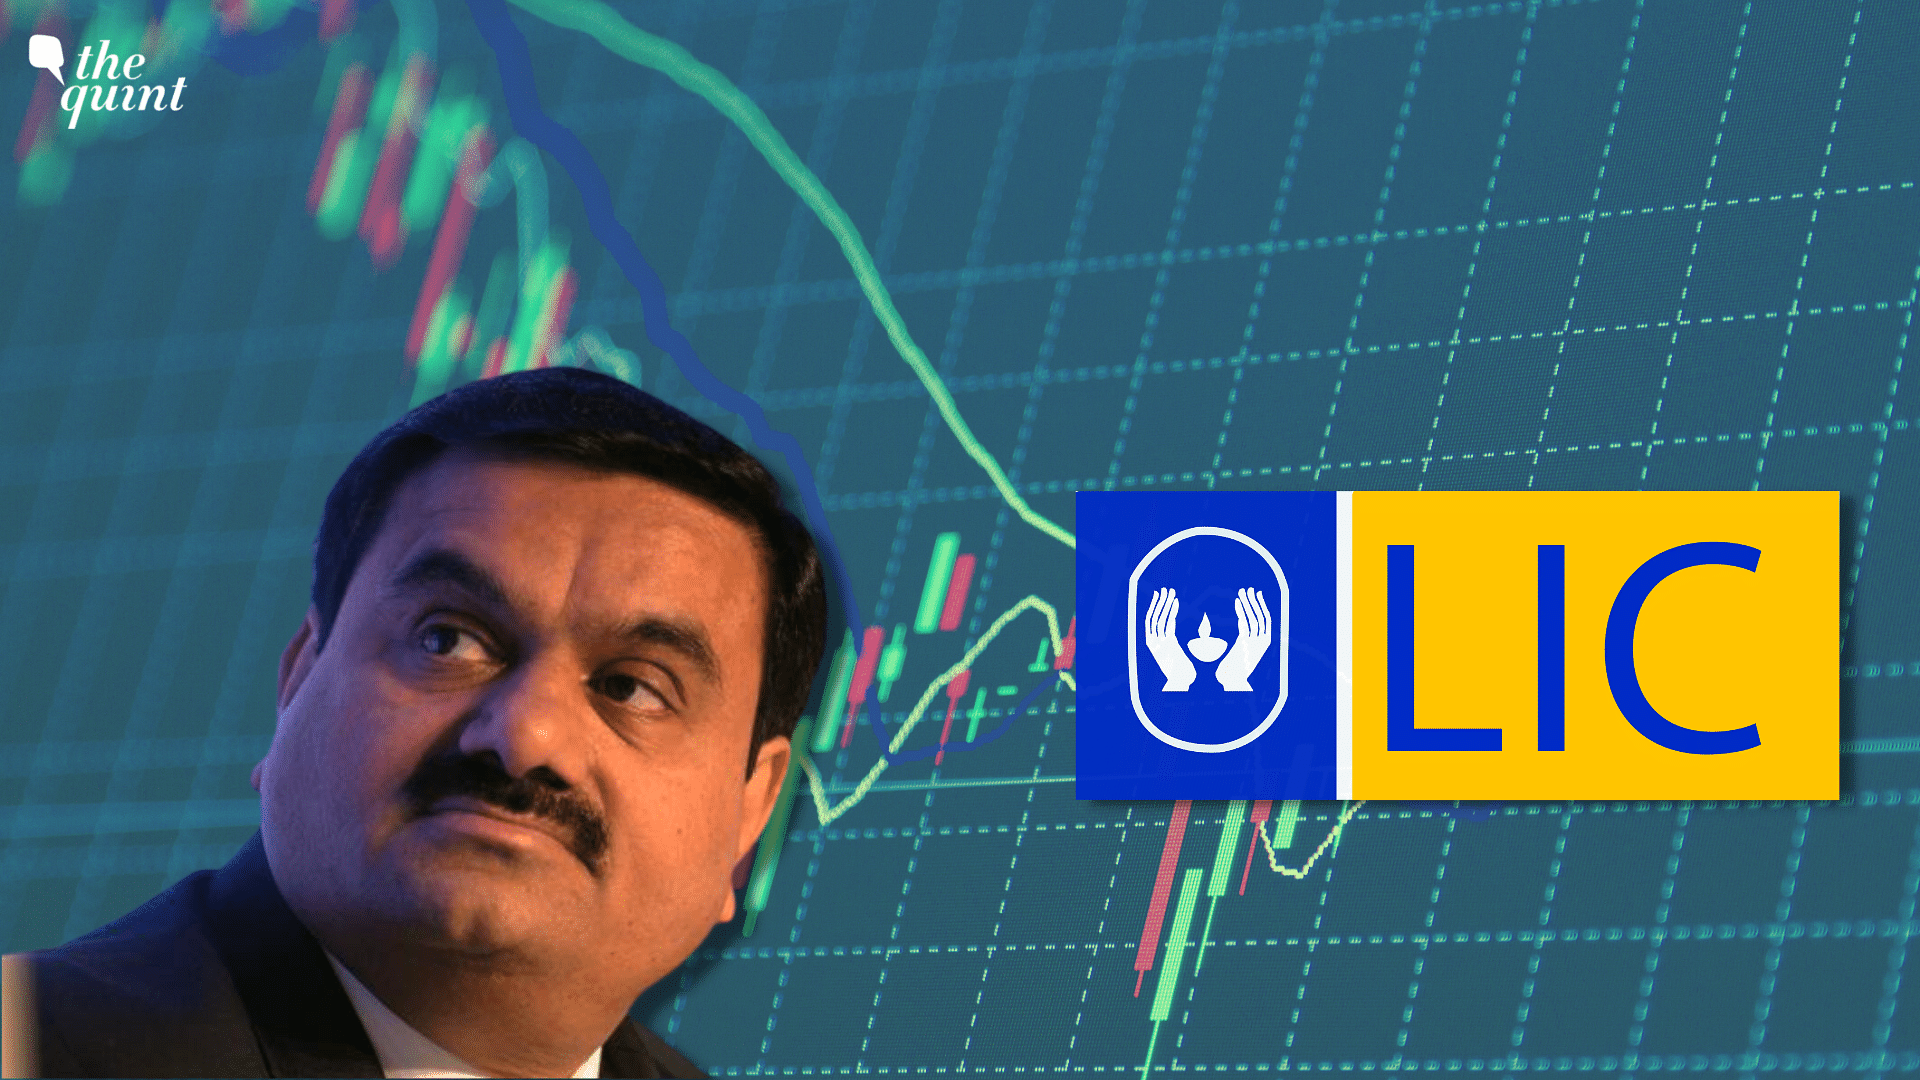 <div class="paragraphs"><p>Gautam Adani, who started the week as the world’s third-richest person, is now ranked seventh on <a href="https://www.thequint.com/news/world/richest-man-in-the-world-2023-5-january-net-worth-and-other-details#:~:text=Richest%20Man%20in%20the%20World%202023%3A%20According%20to%20the%20Forbes,worth%20of%20approximately%20%24192.0%20billion.">Forbes’ billionaire tracker</a>.</p></div>